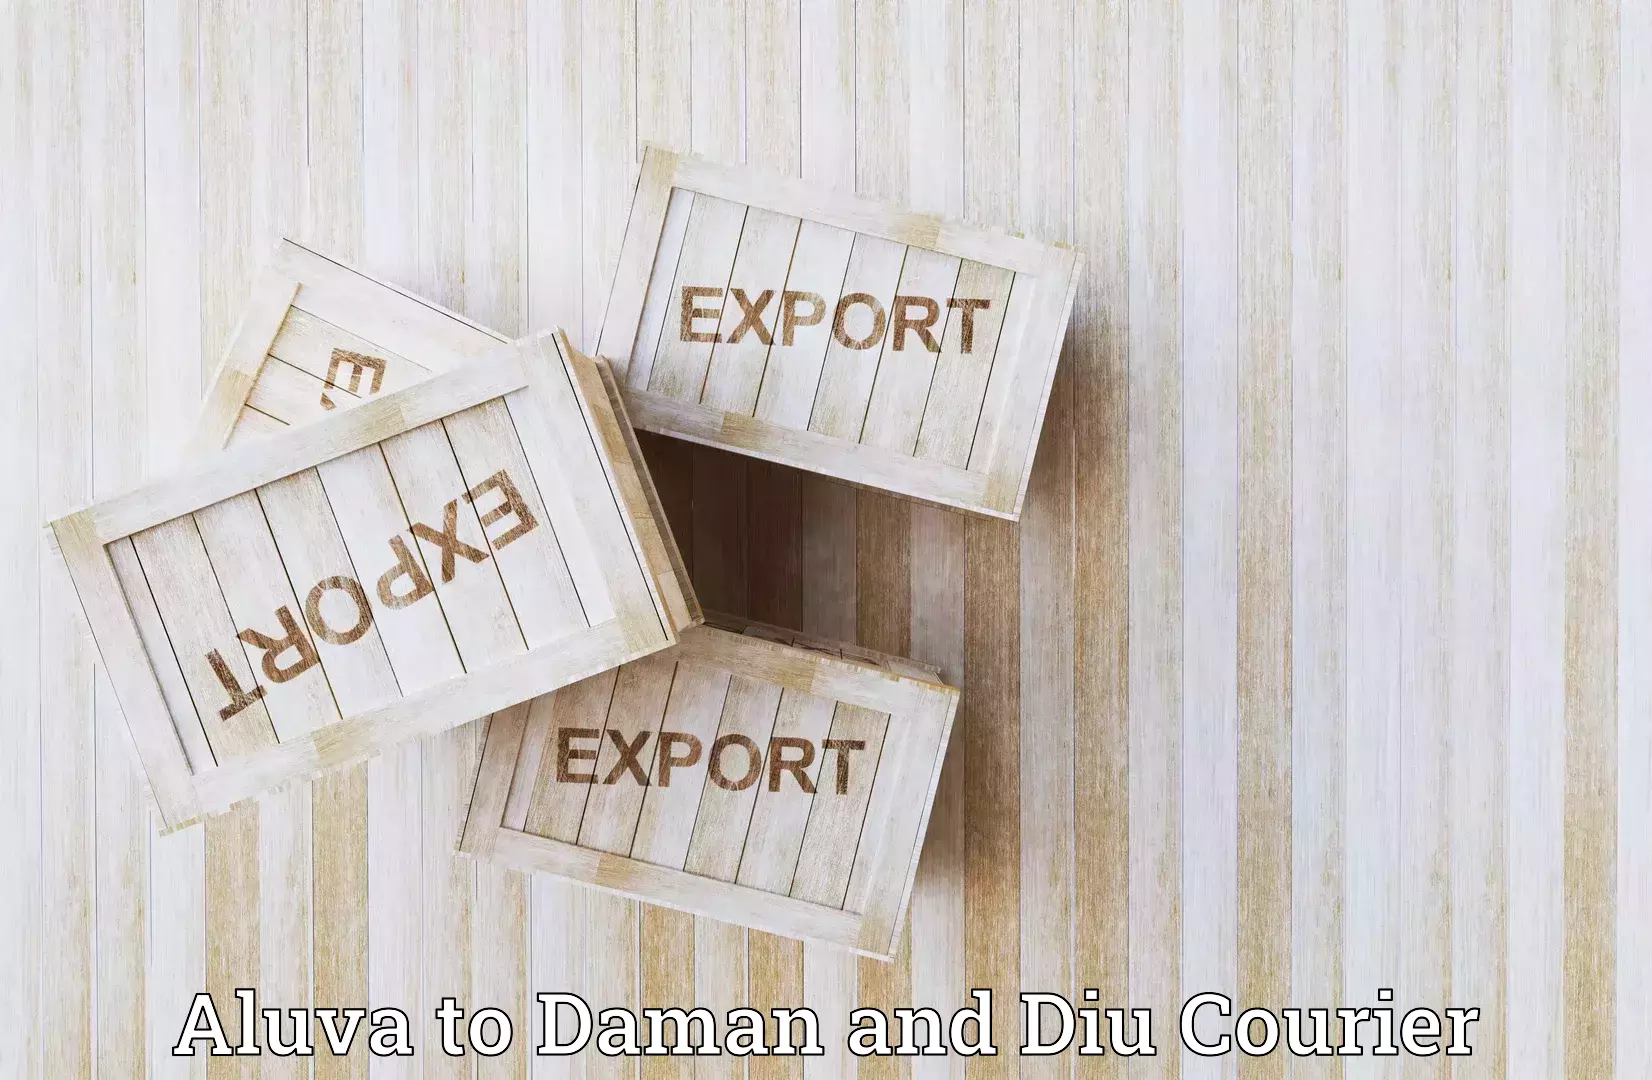 Efficient package consolidation Aluva to Daman and Diu